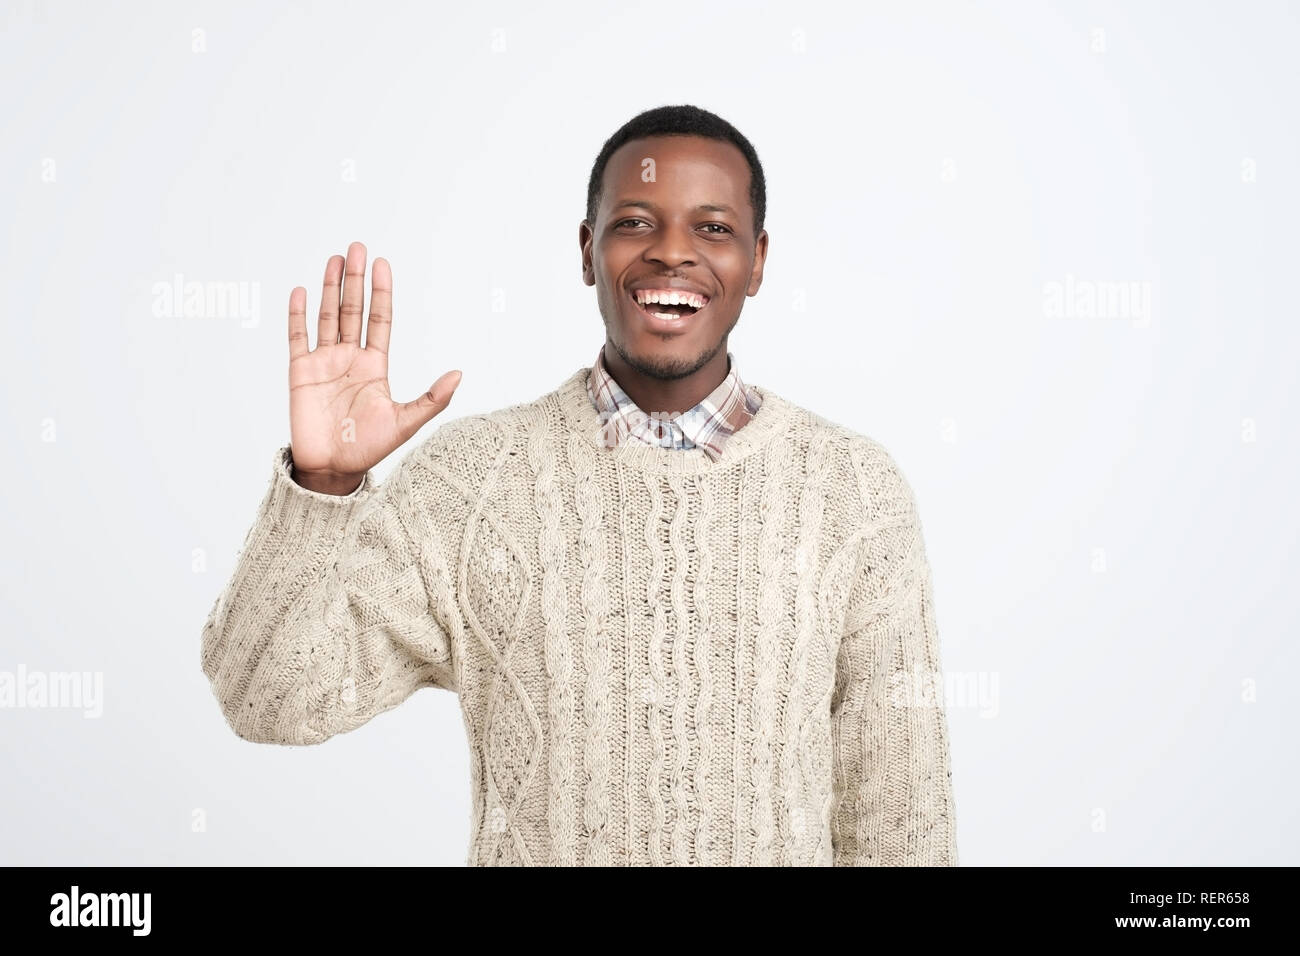 Polite young African American man dressed in sweater saying hi Stock Photo